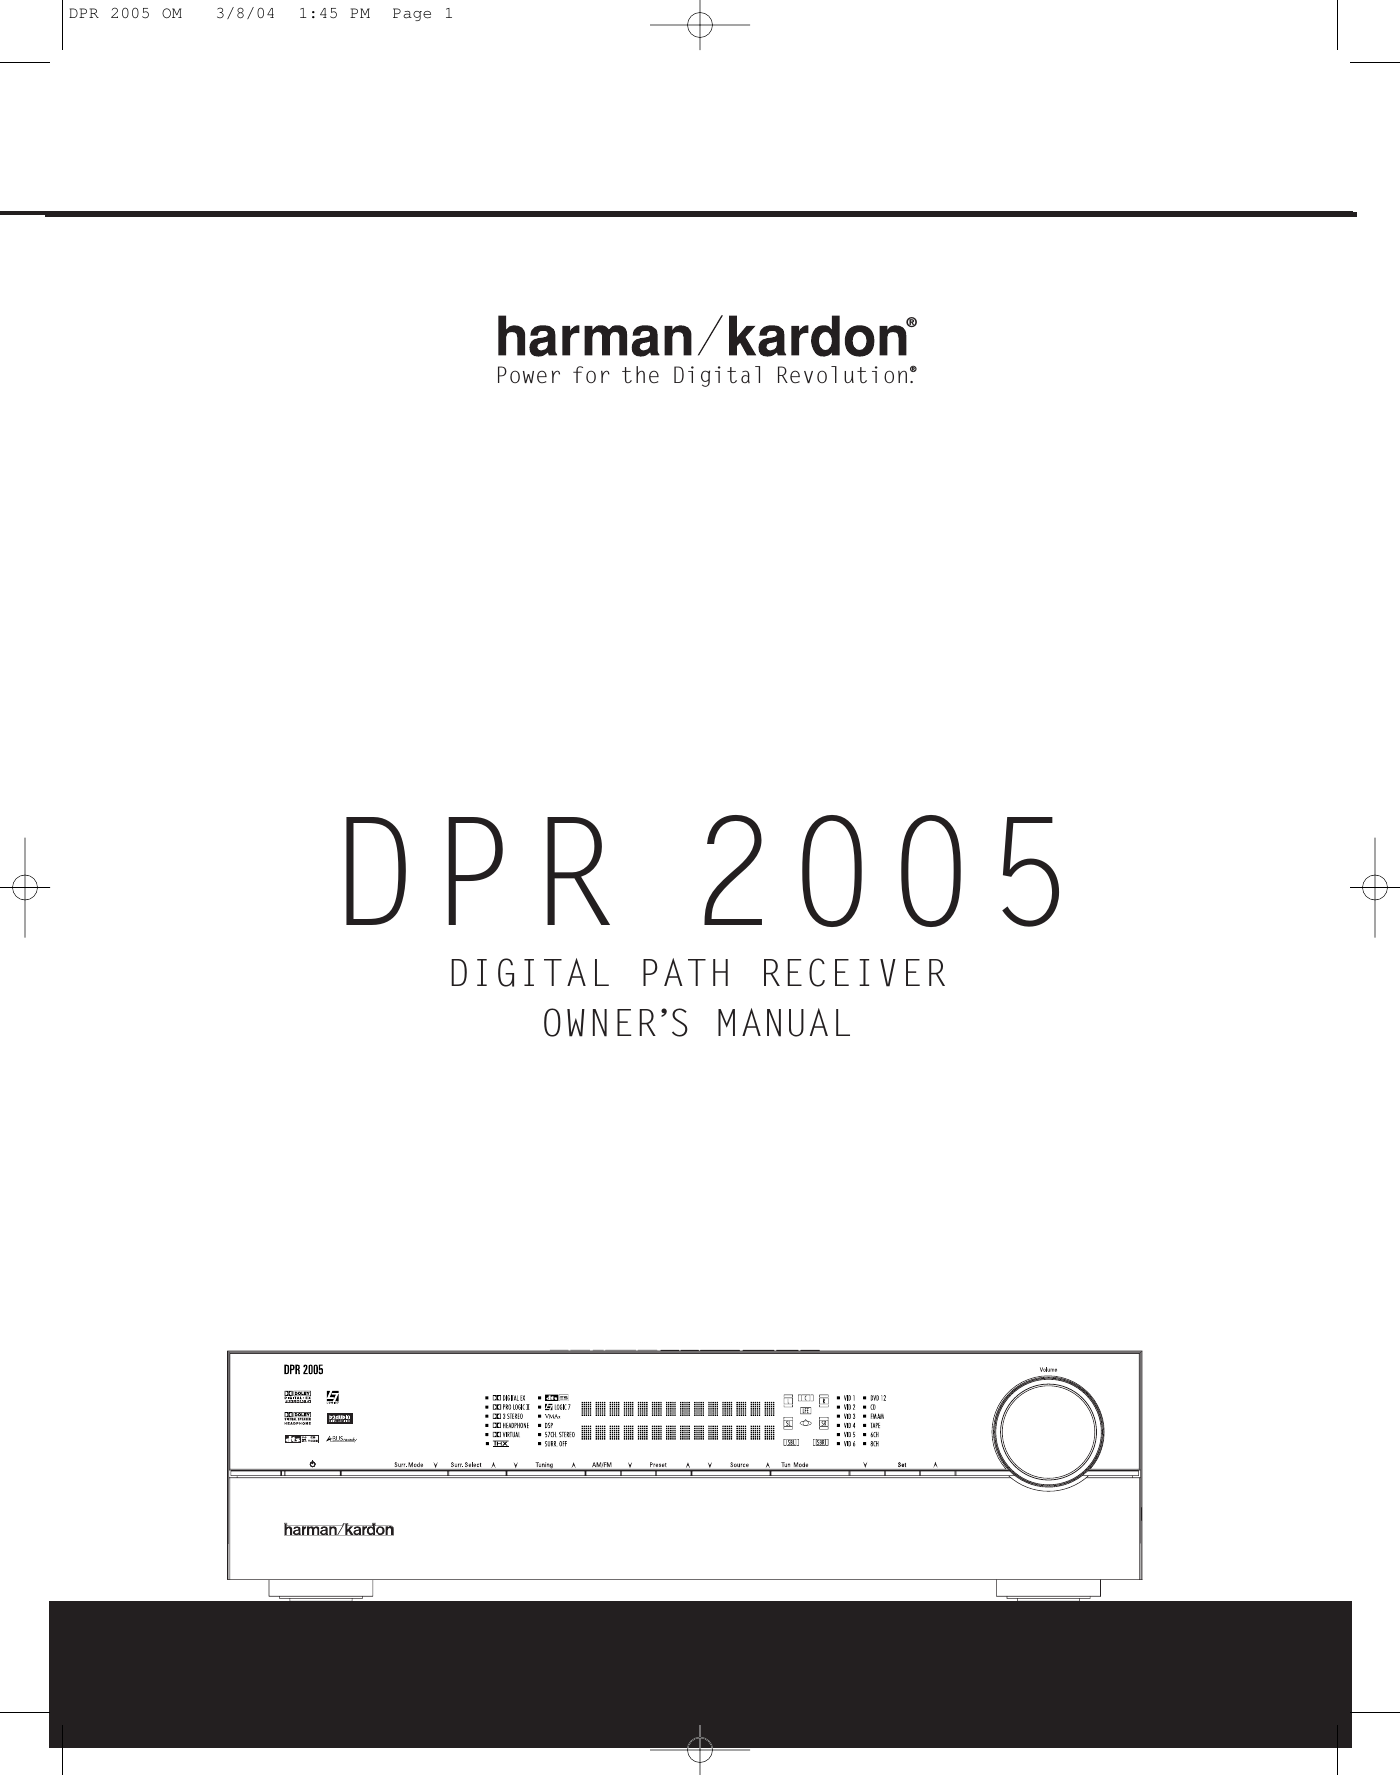 DPR 2005DIGITAL PATH RECEIVEROWNER’S MANUALPower for the Digital Revolution.®®DPR 2005 OM   3/8/04  1:45 PM  Page 1